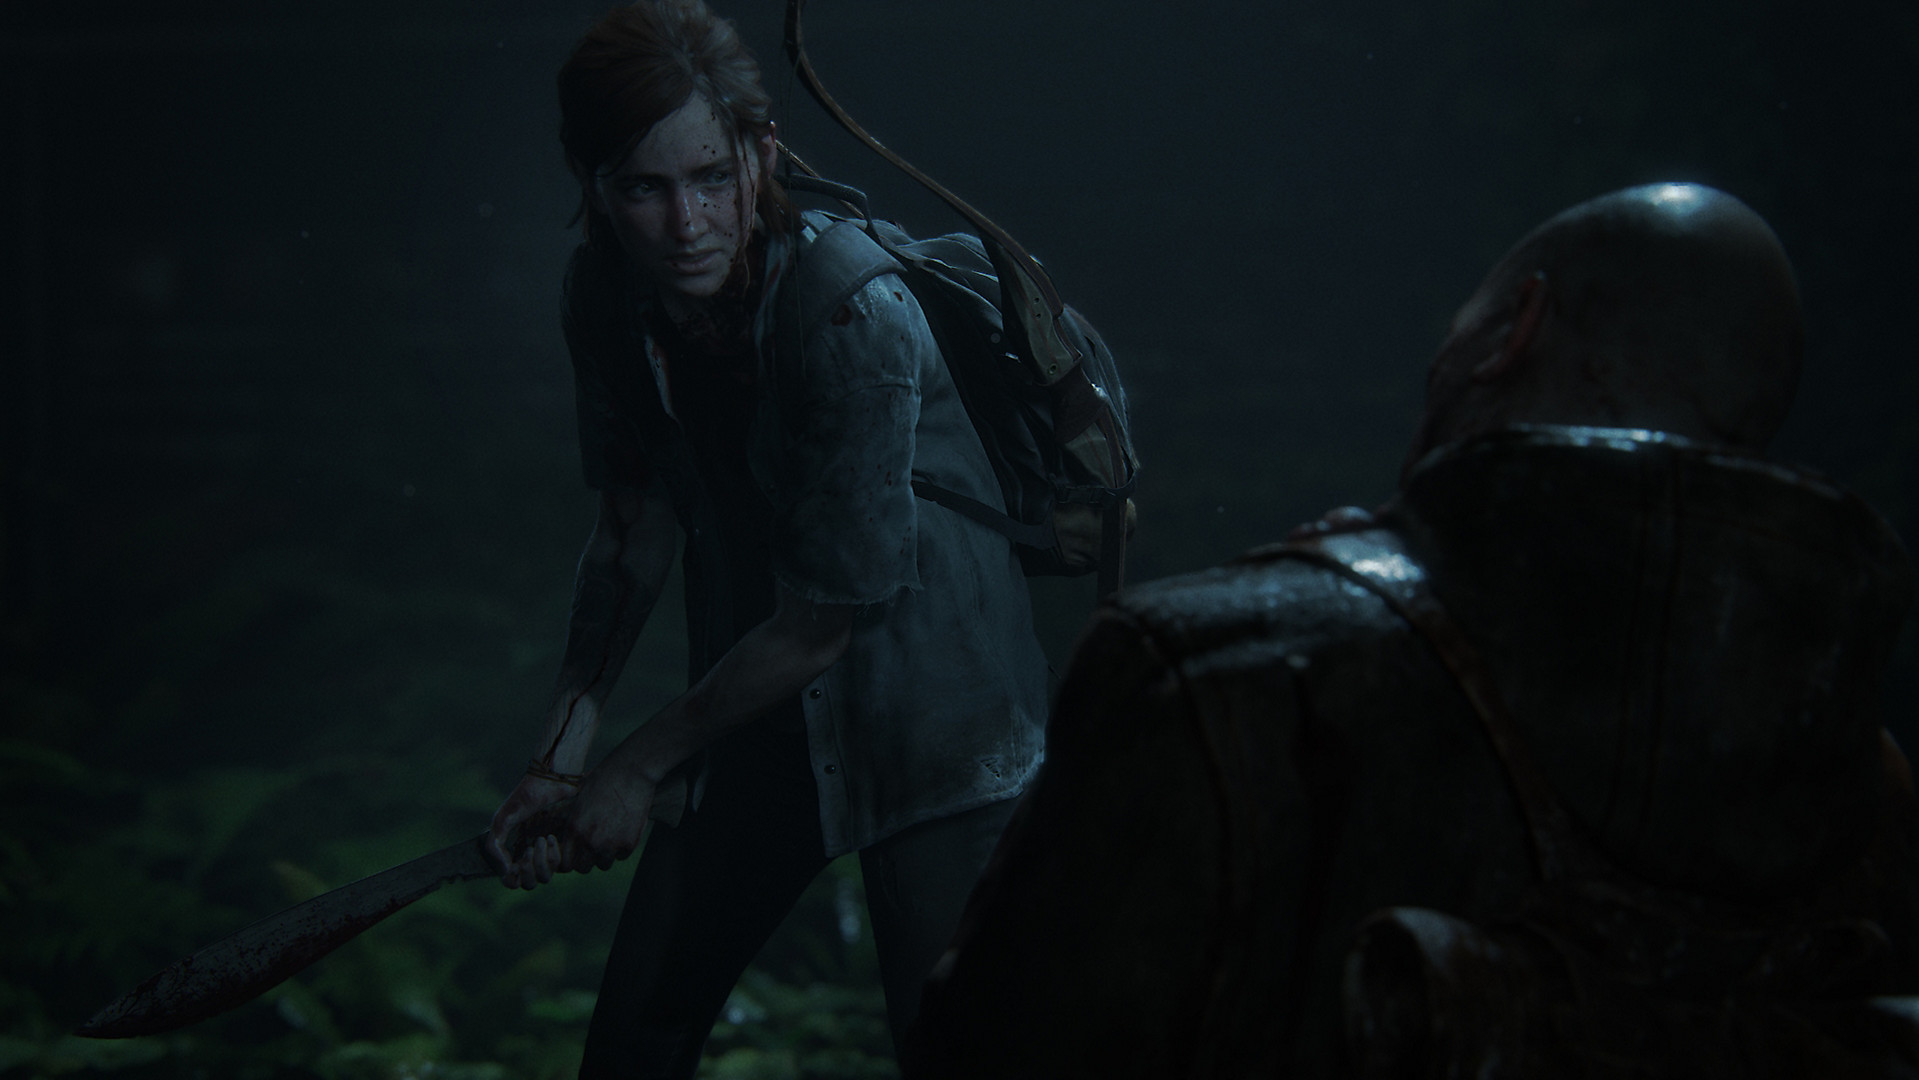 The Last of Us Part 2: release date, gameplay details, story